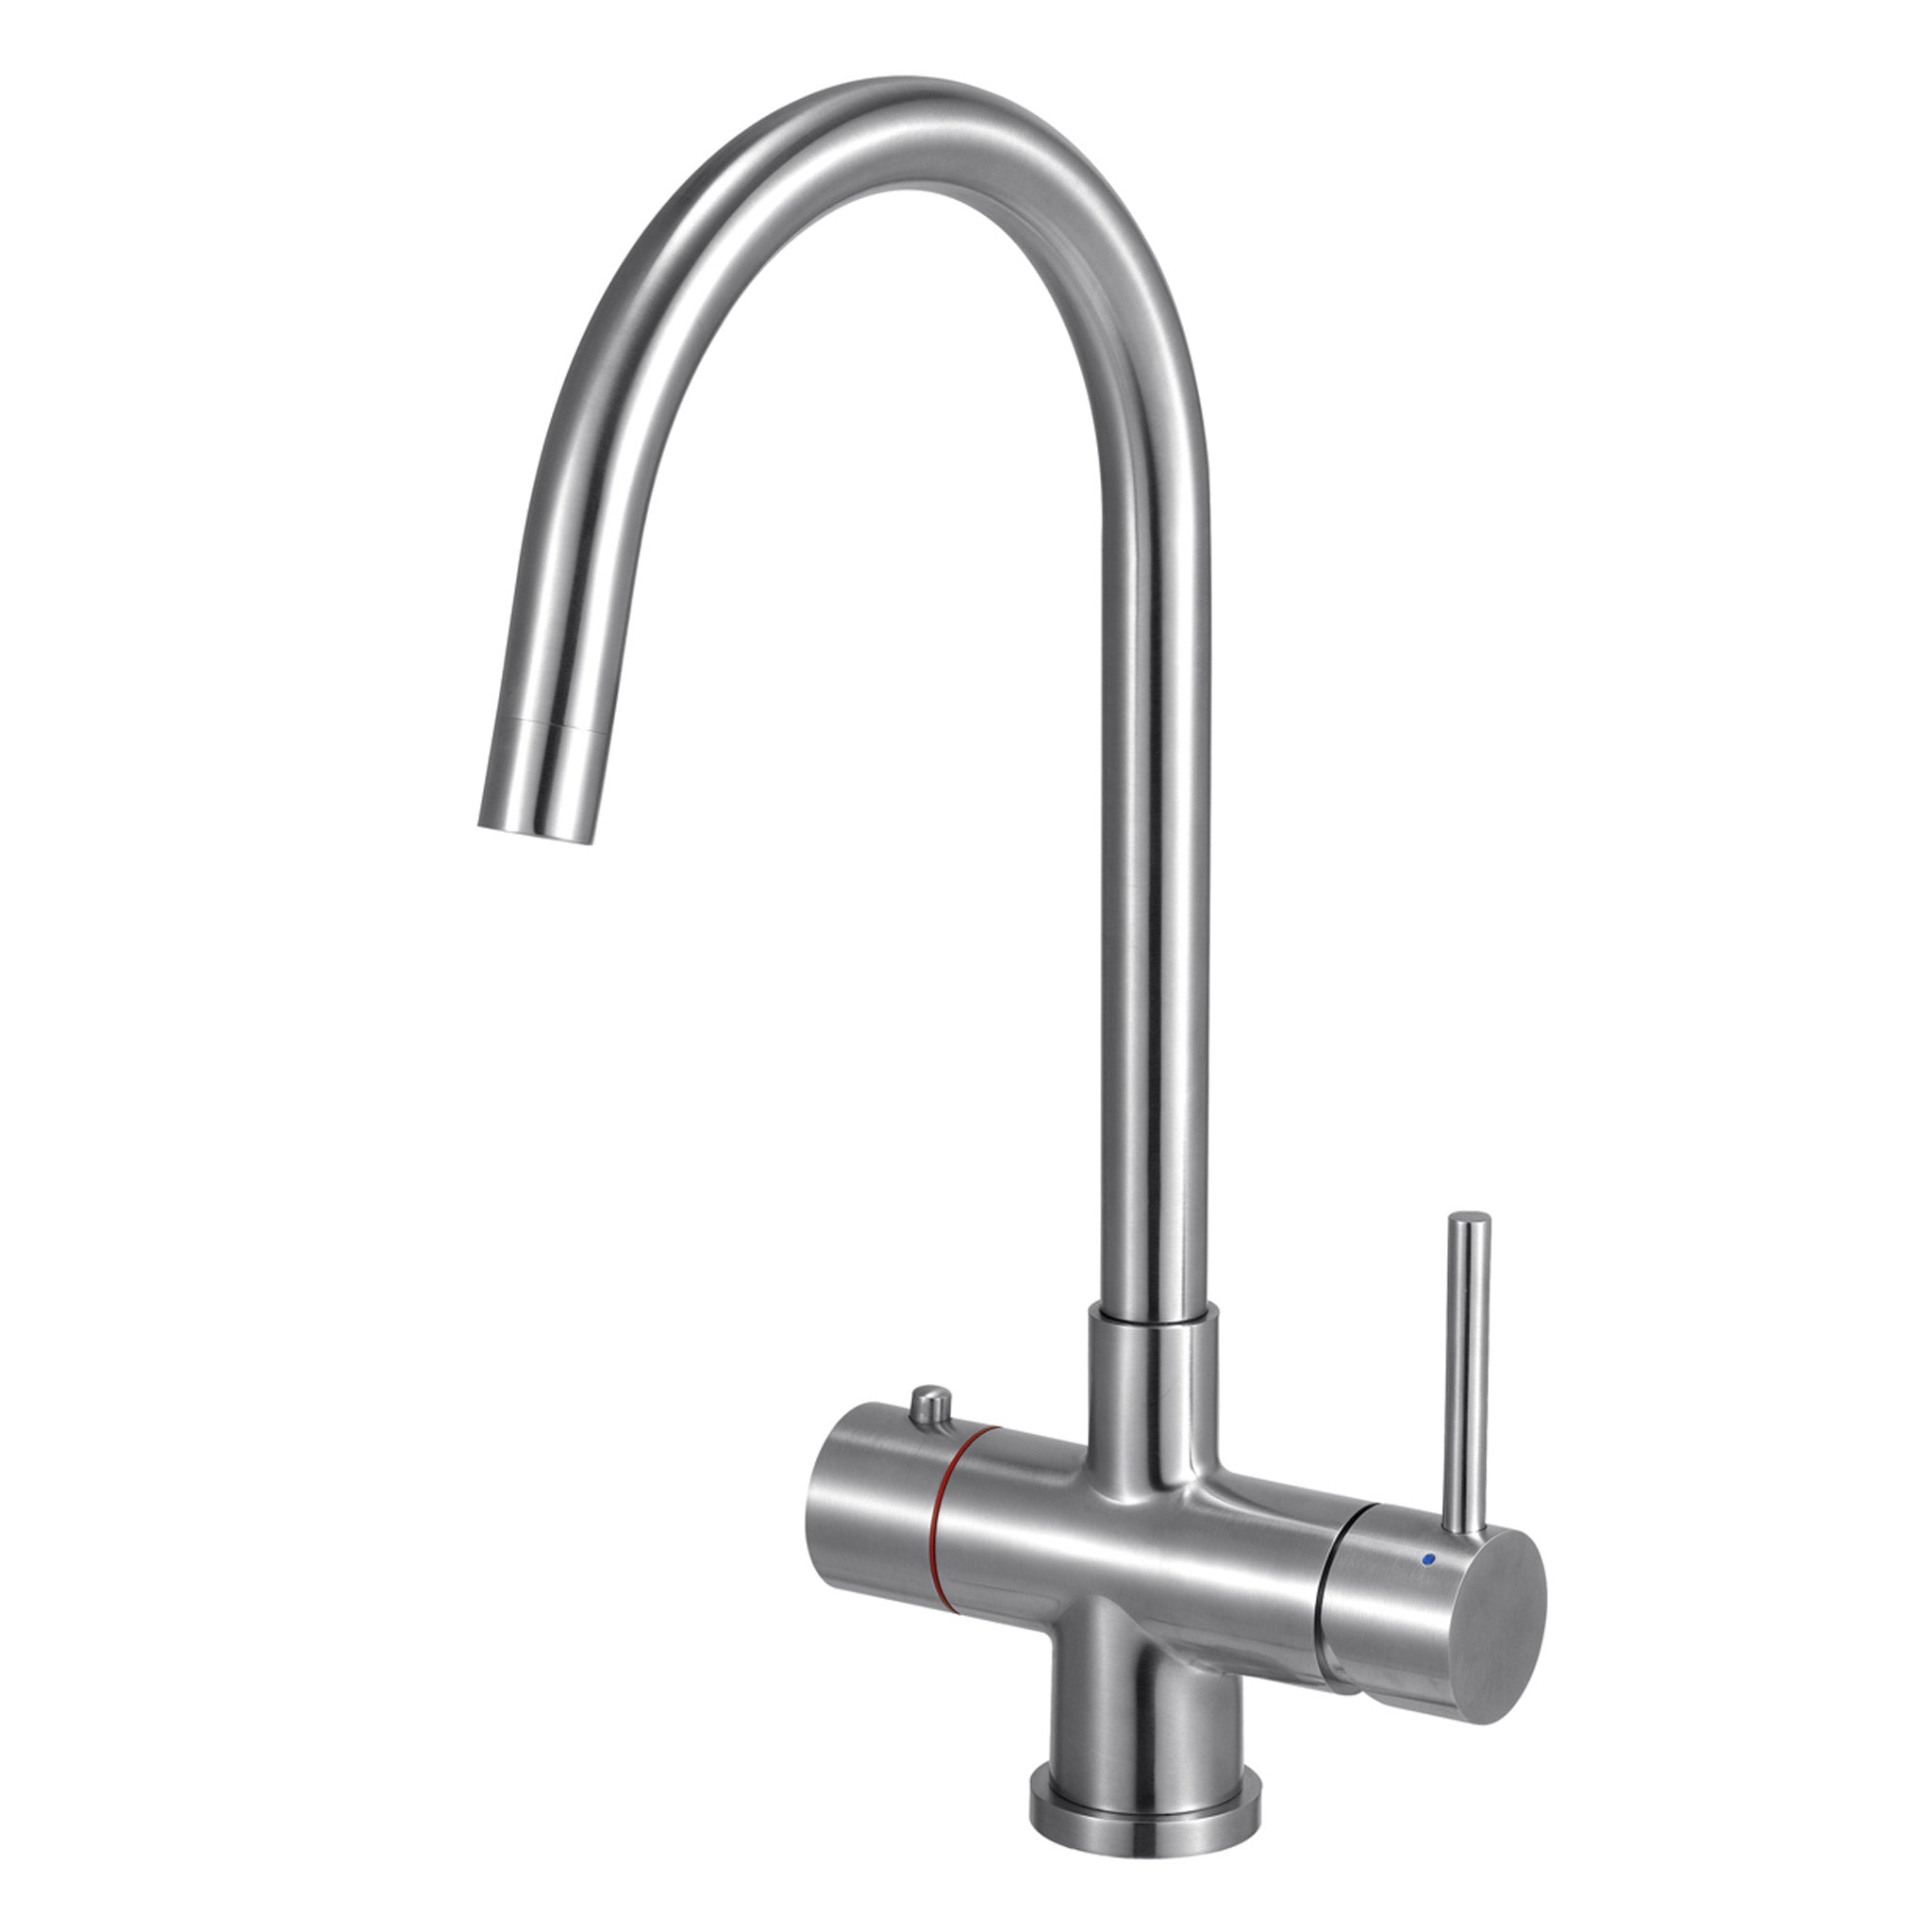 JTP Instant Hot & Cold Water Kitchen Sink Mixer Tap With Boiler & Filter Unit